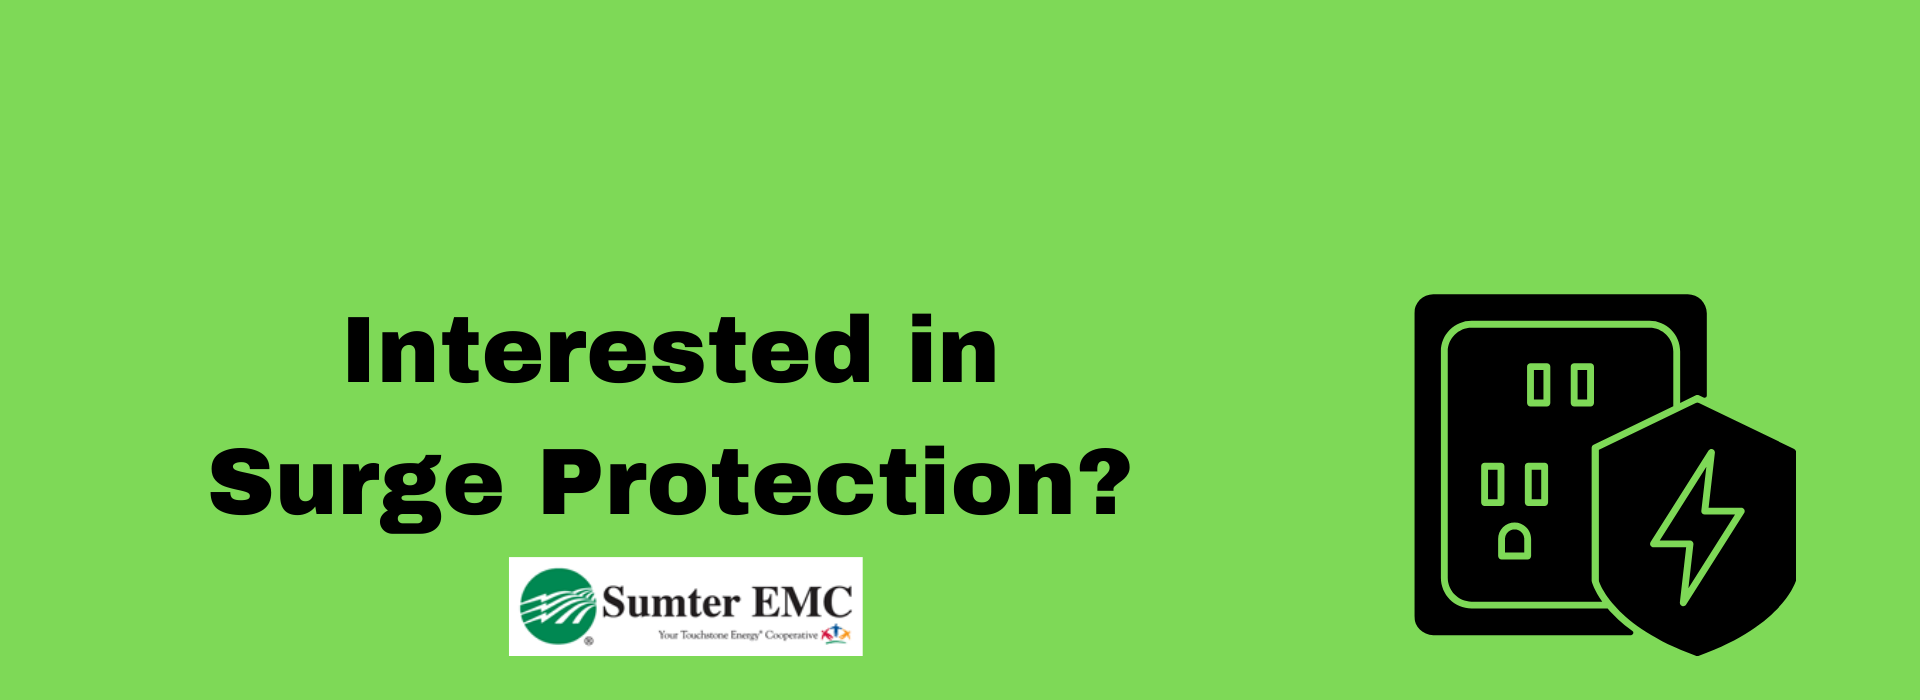 Interested in Surge Protection?